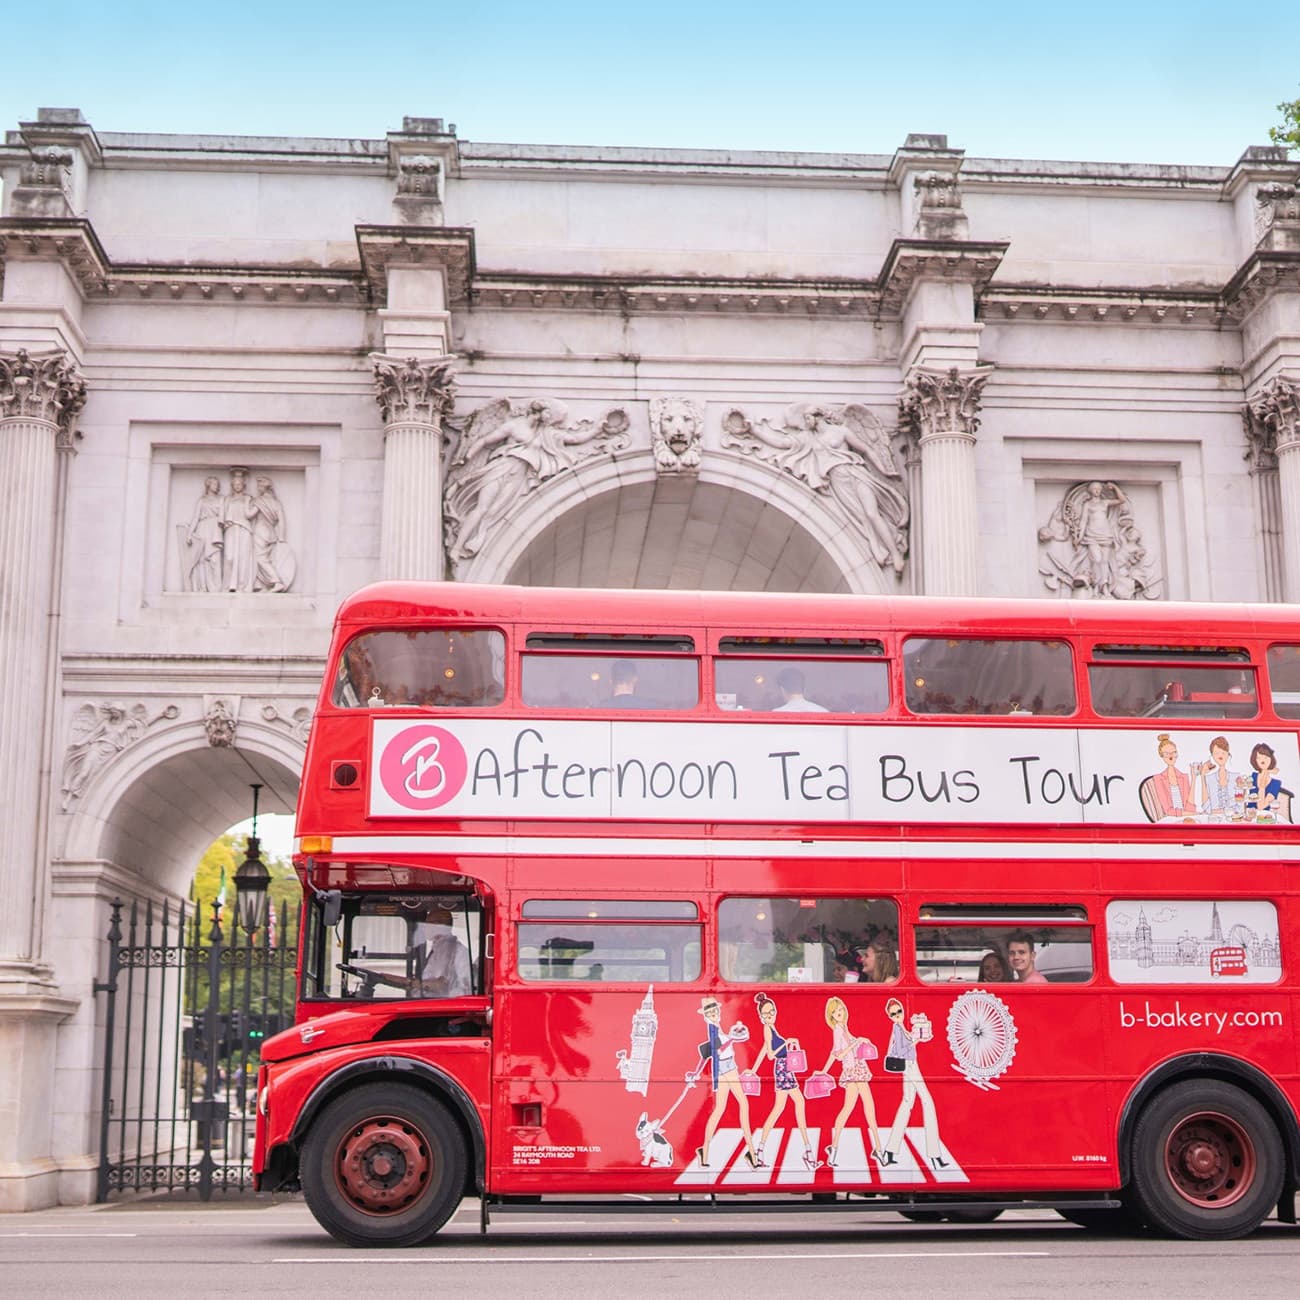 London experience gifts: Classic Afternoon Tea Bus Tour